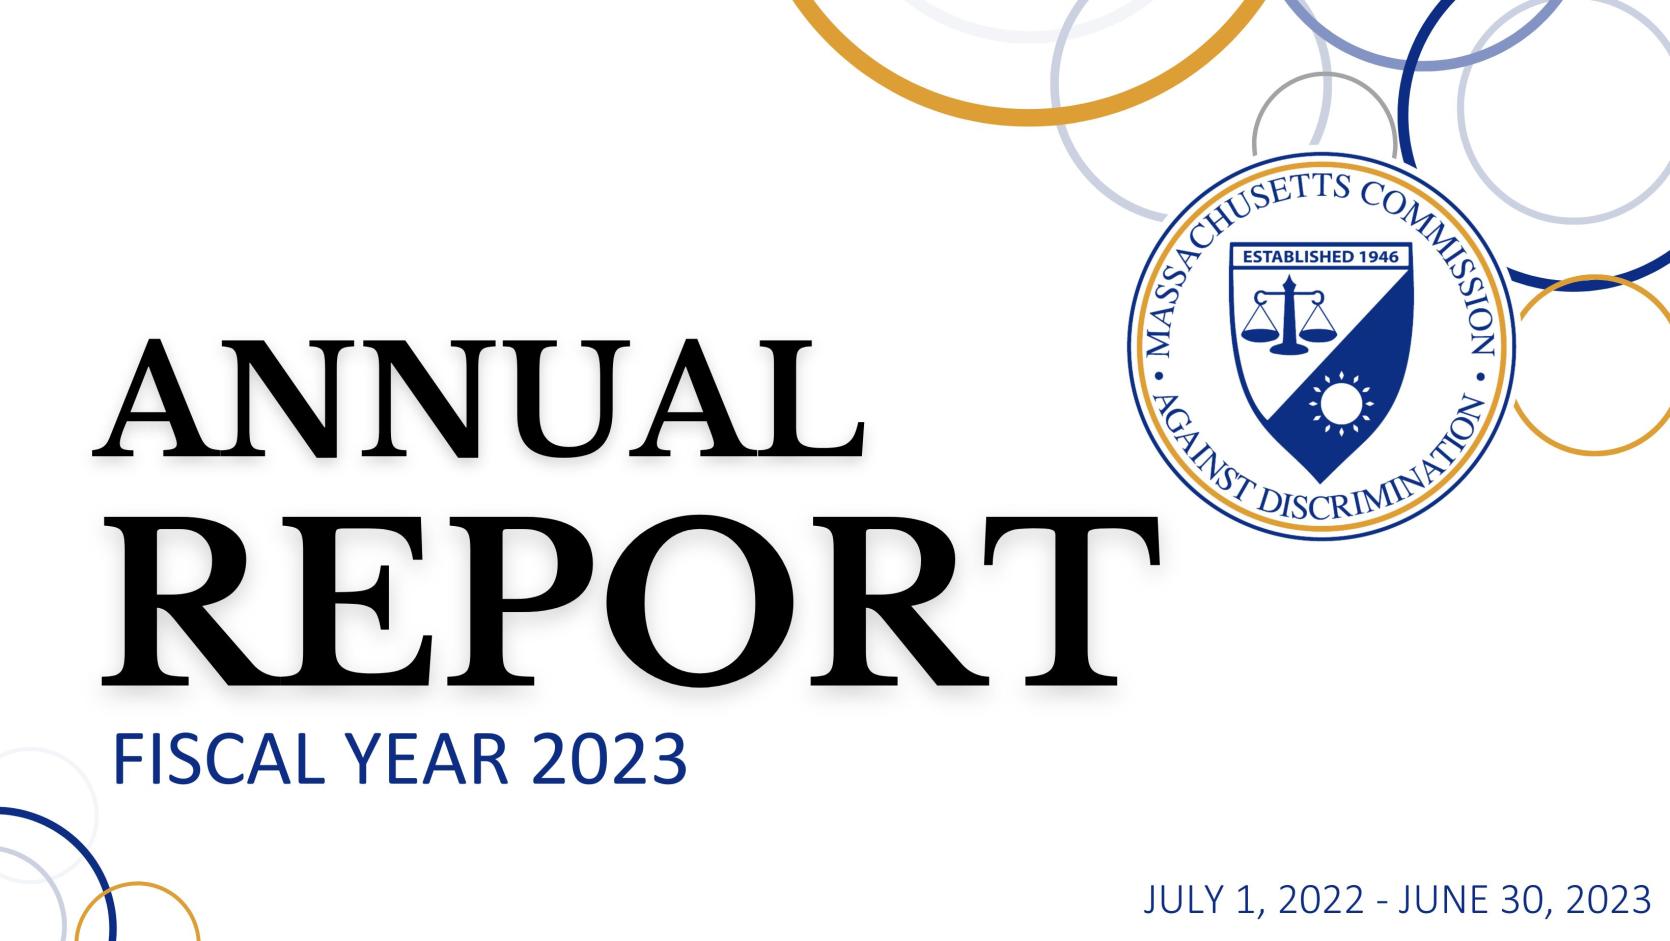 MCAD Annual Report Fiscal Year 2023; July 1, 2022 - June 30, 2023. Image matches Annual Report cover page.